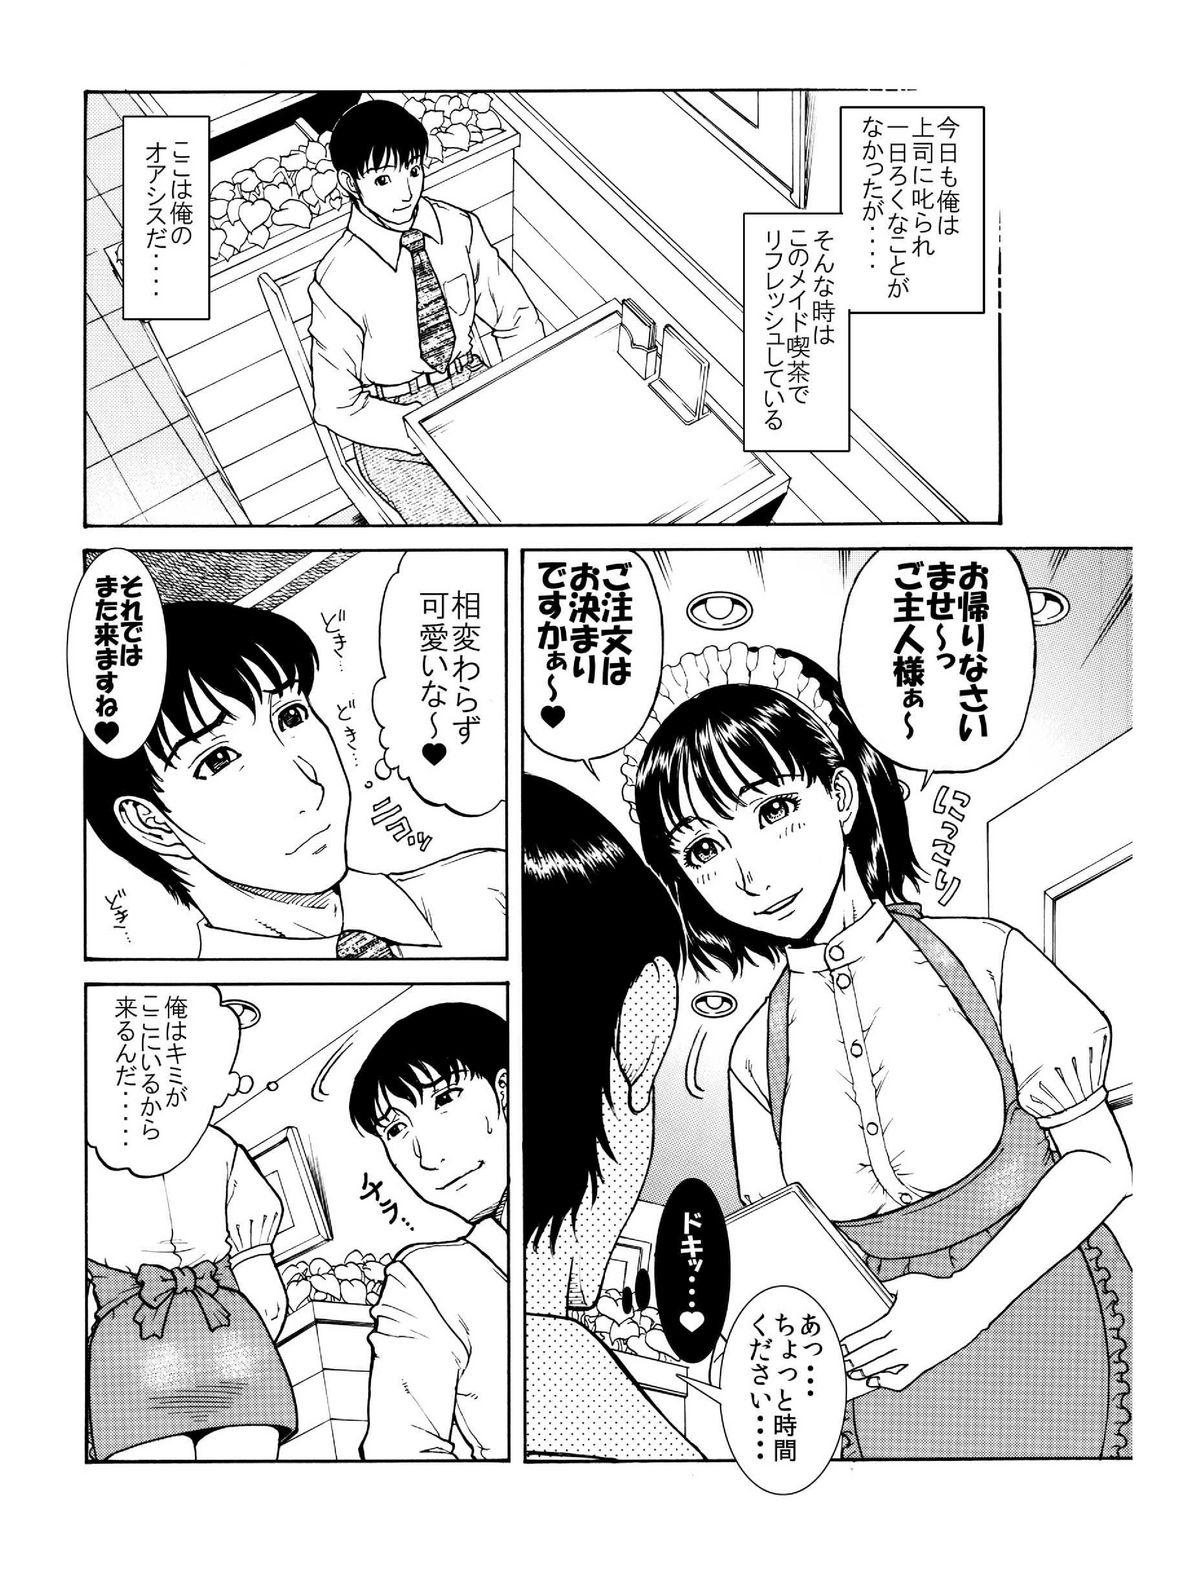 Hardcore Porn 「あのメイド♀は俺だけのモノ!」 Oldvsyoung - Page 2